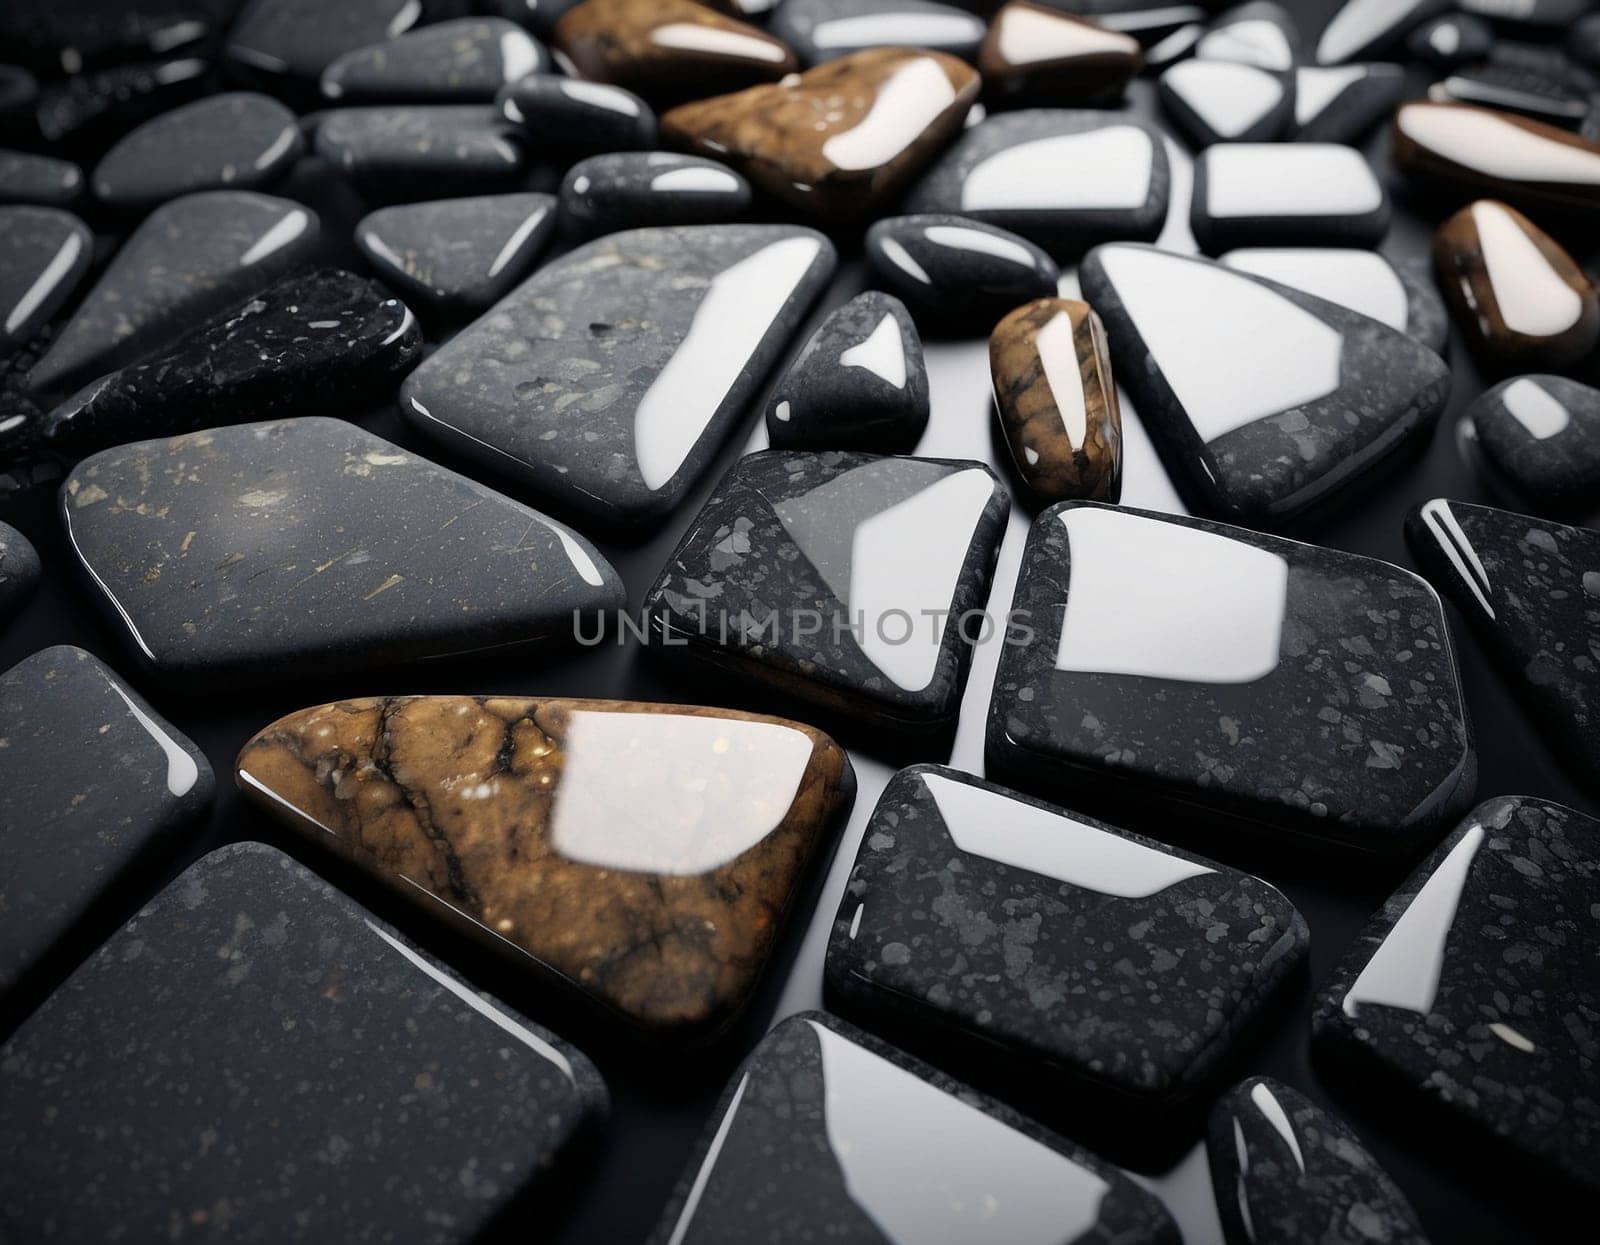 Professional background with expensive black mountain granite and marble. High quality illustration